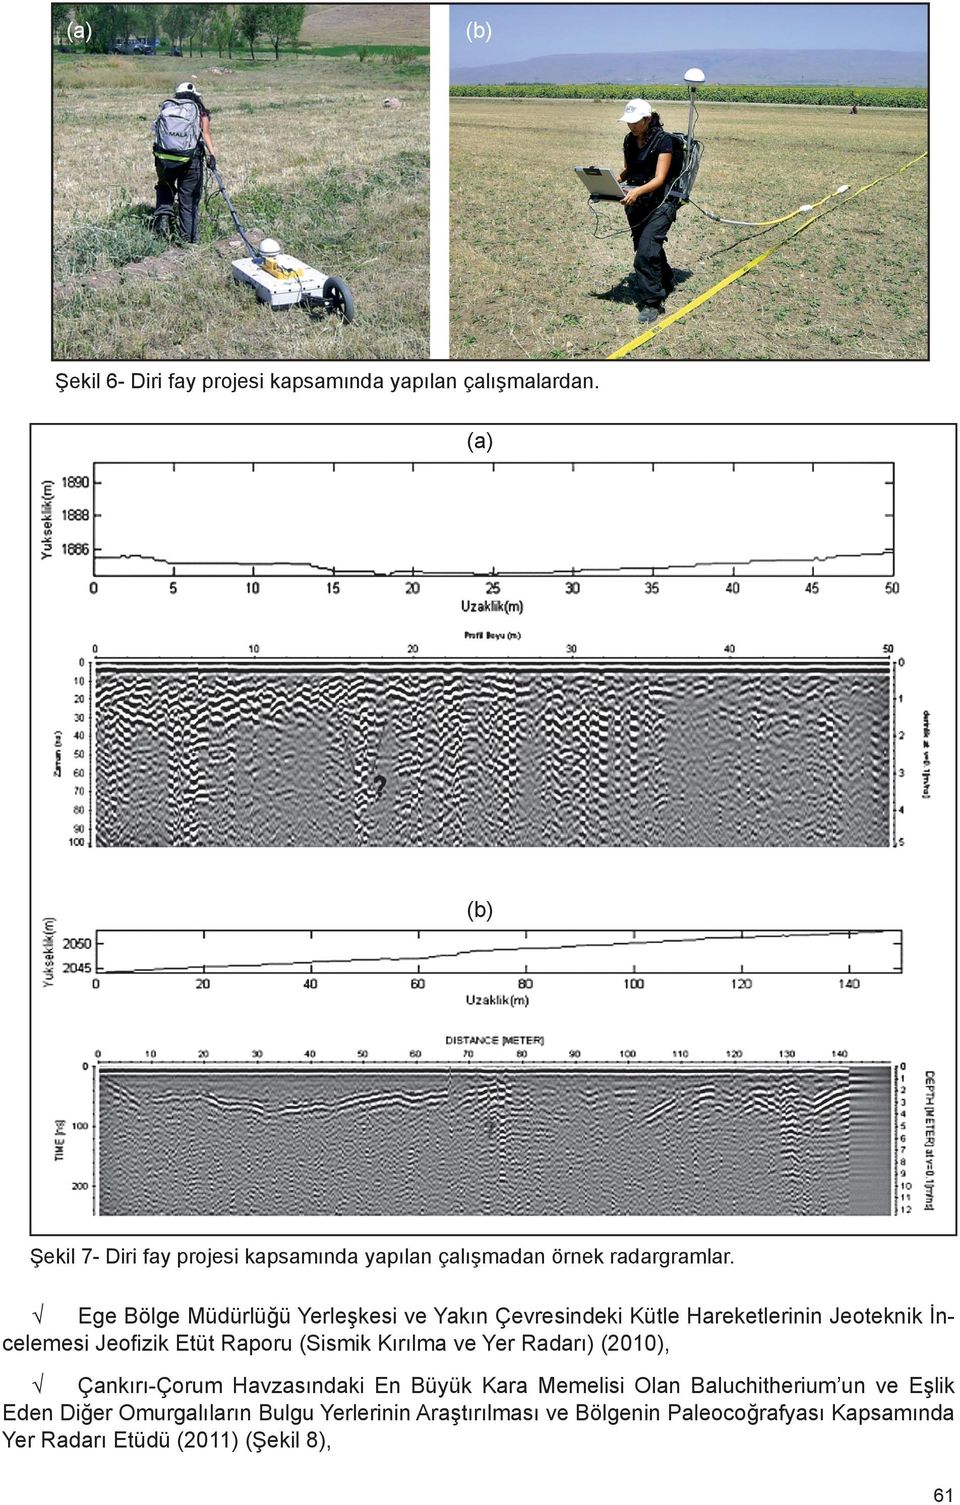 3D visualization of integrated ground penetrating radar data and EM-61 data to determine buried objects and their characteristics. Journal of Geophysics and Engineering, 5, 448-456. Kadıoğlu, S.